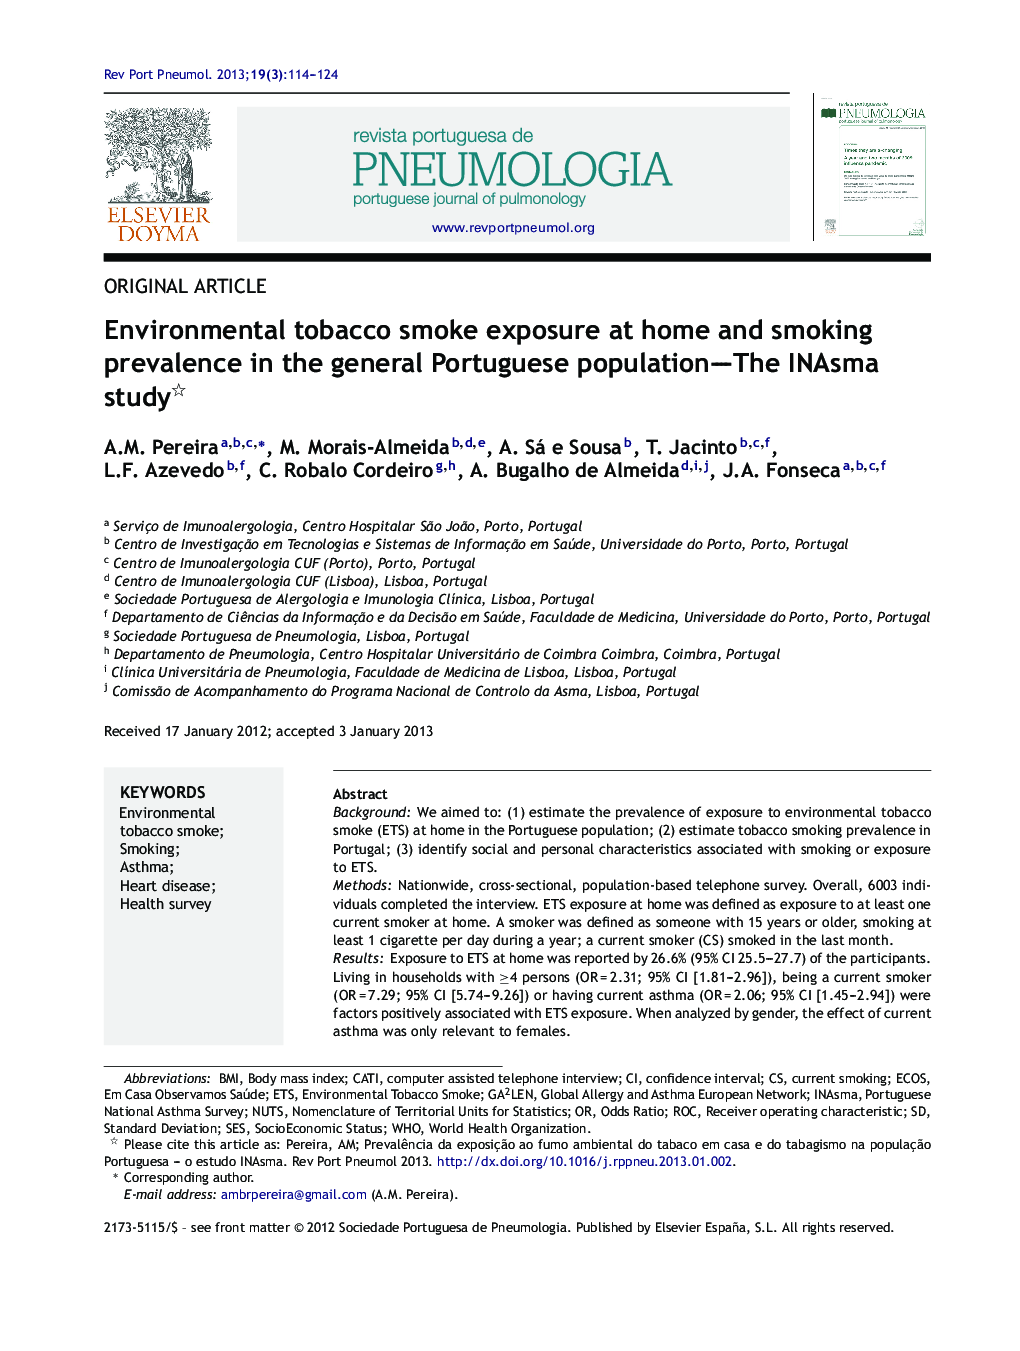 Environmental tobacco smoke exposure at home and smoking prevalence in the general Portuguese population-The INAsma study